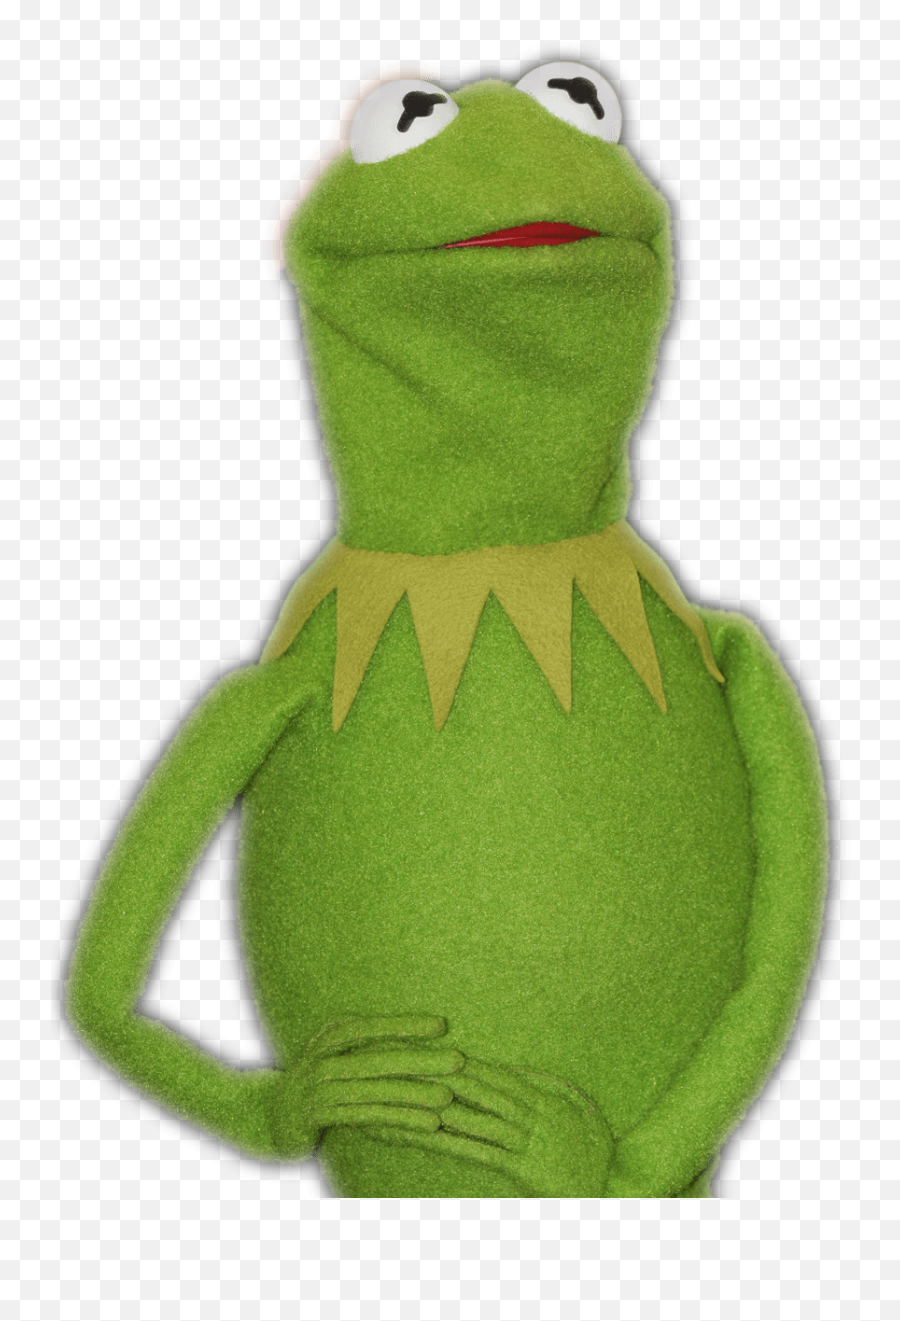 Its Not Easy Being Green - Kermit Png Transparent Emoji,Kermit The Frog Transparent